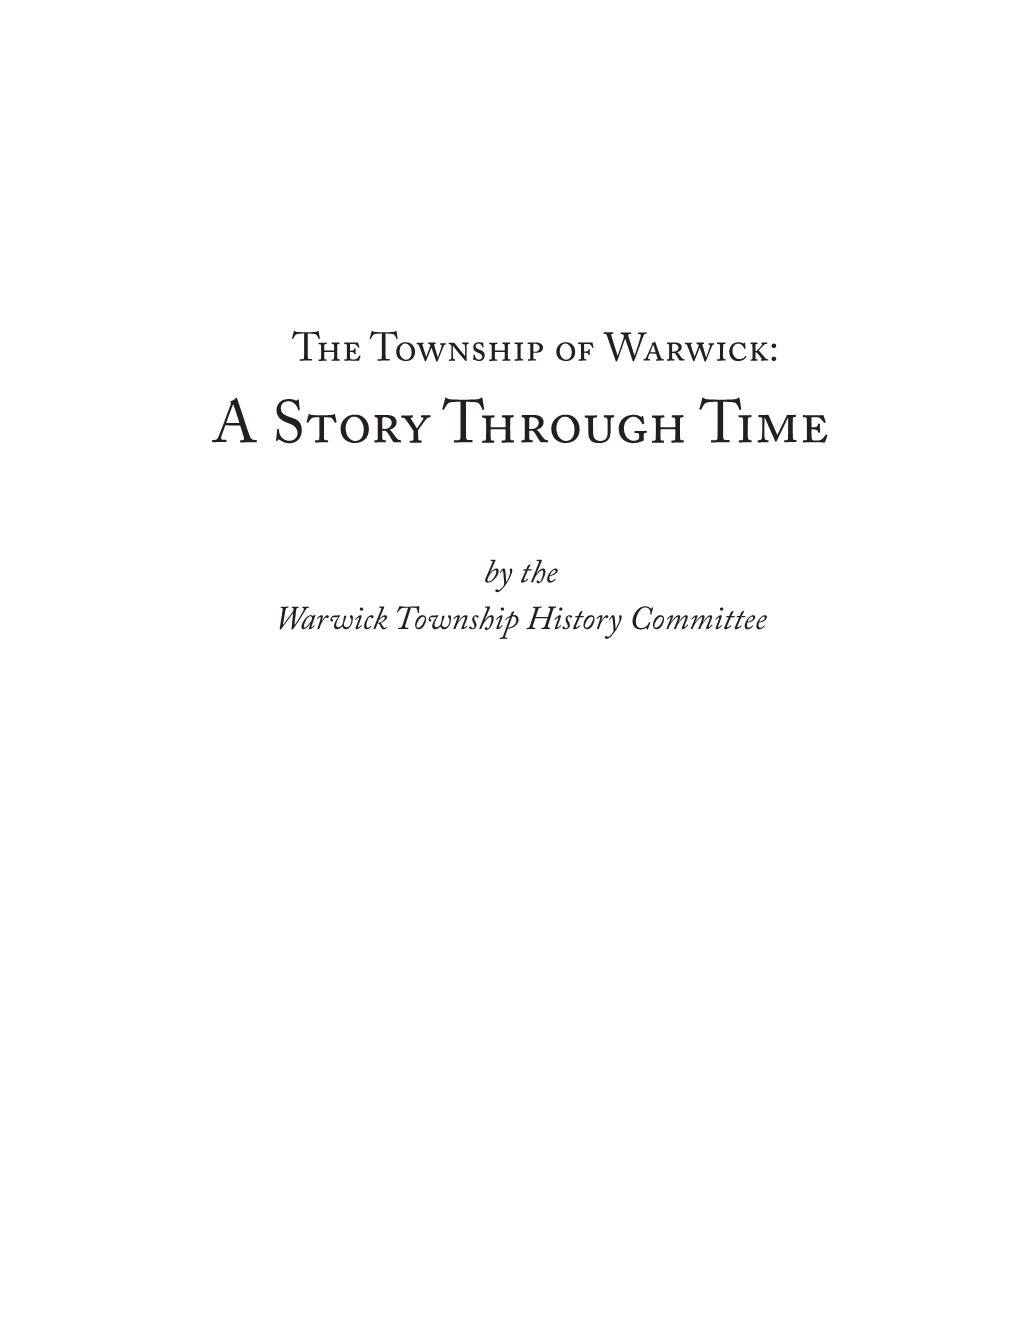 The Township of Warwick: a Story Through Time